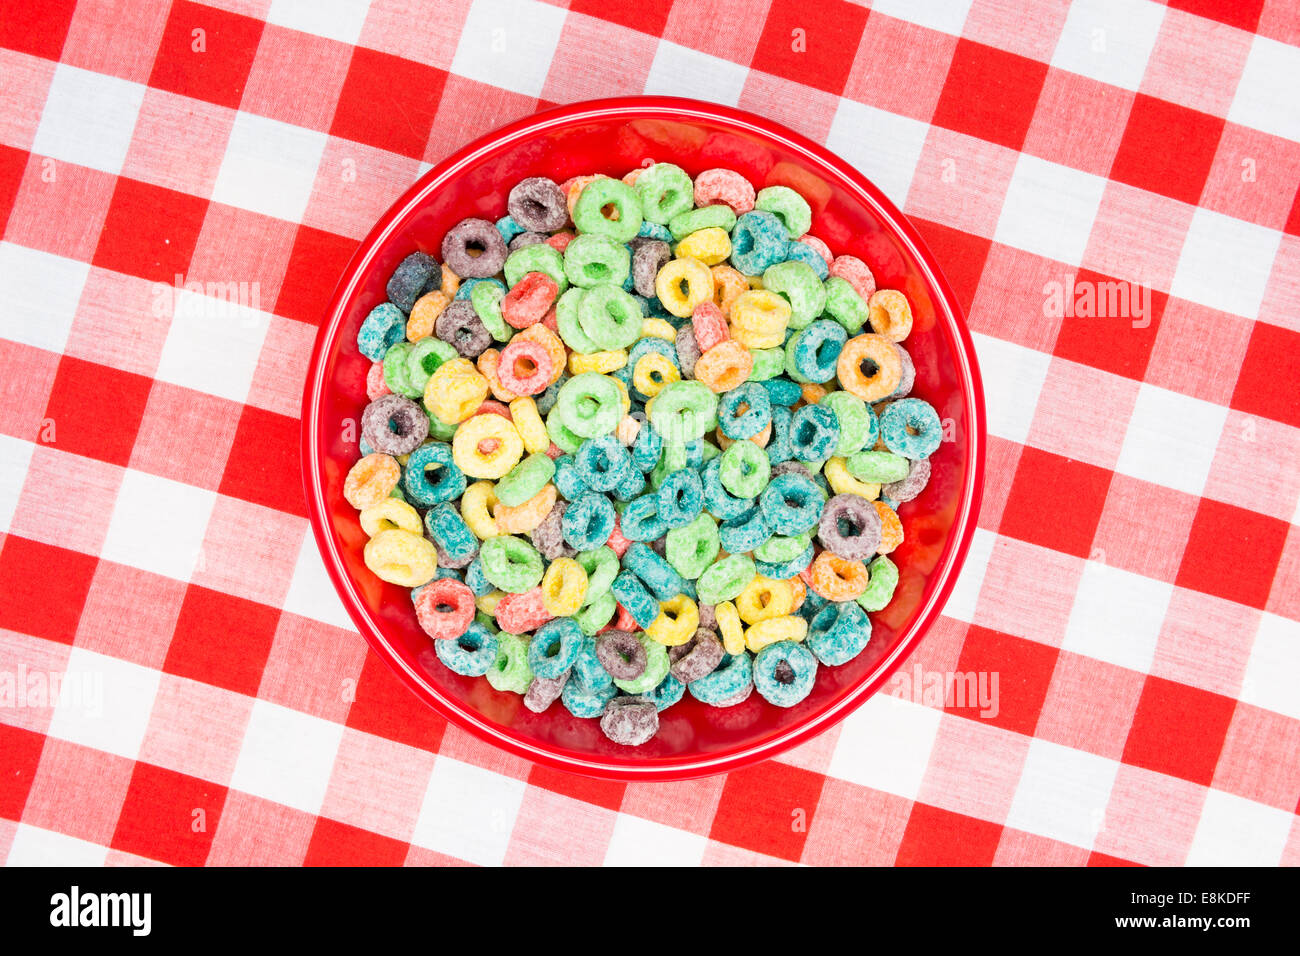 A red bowl of sugary, sweet looped grain cereal and milk on a classic, red, checkered tablecloth ready as a breakfast meal. Stock Photo